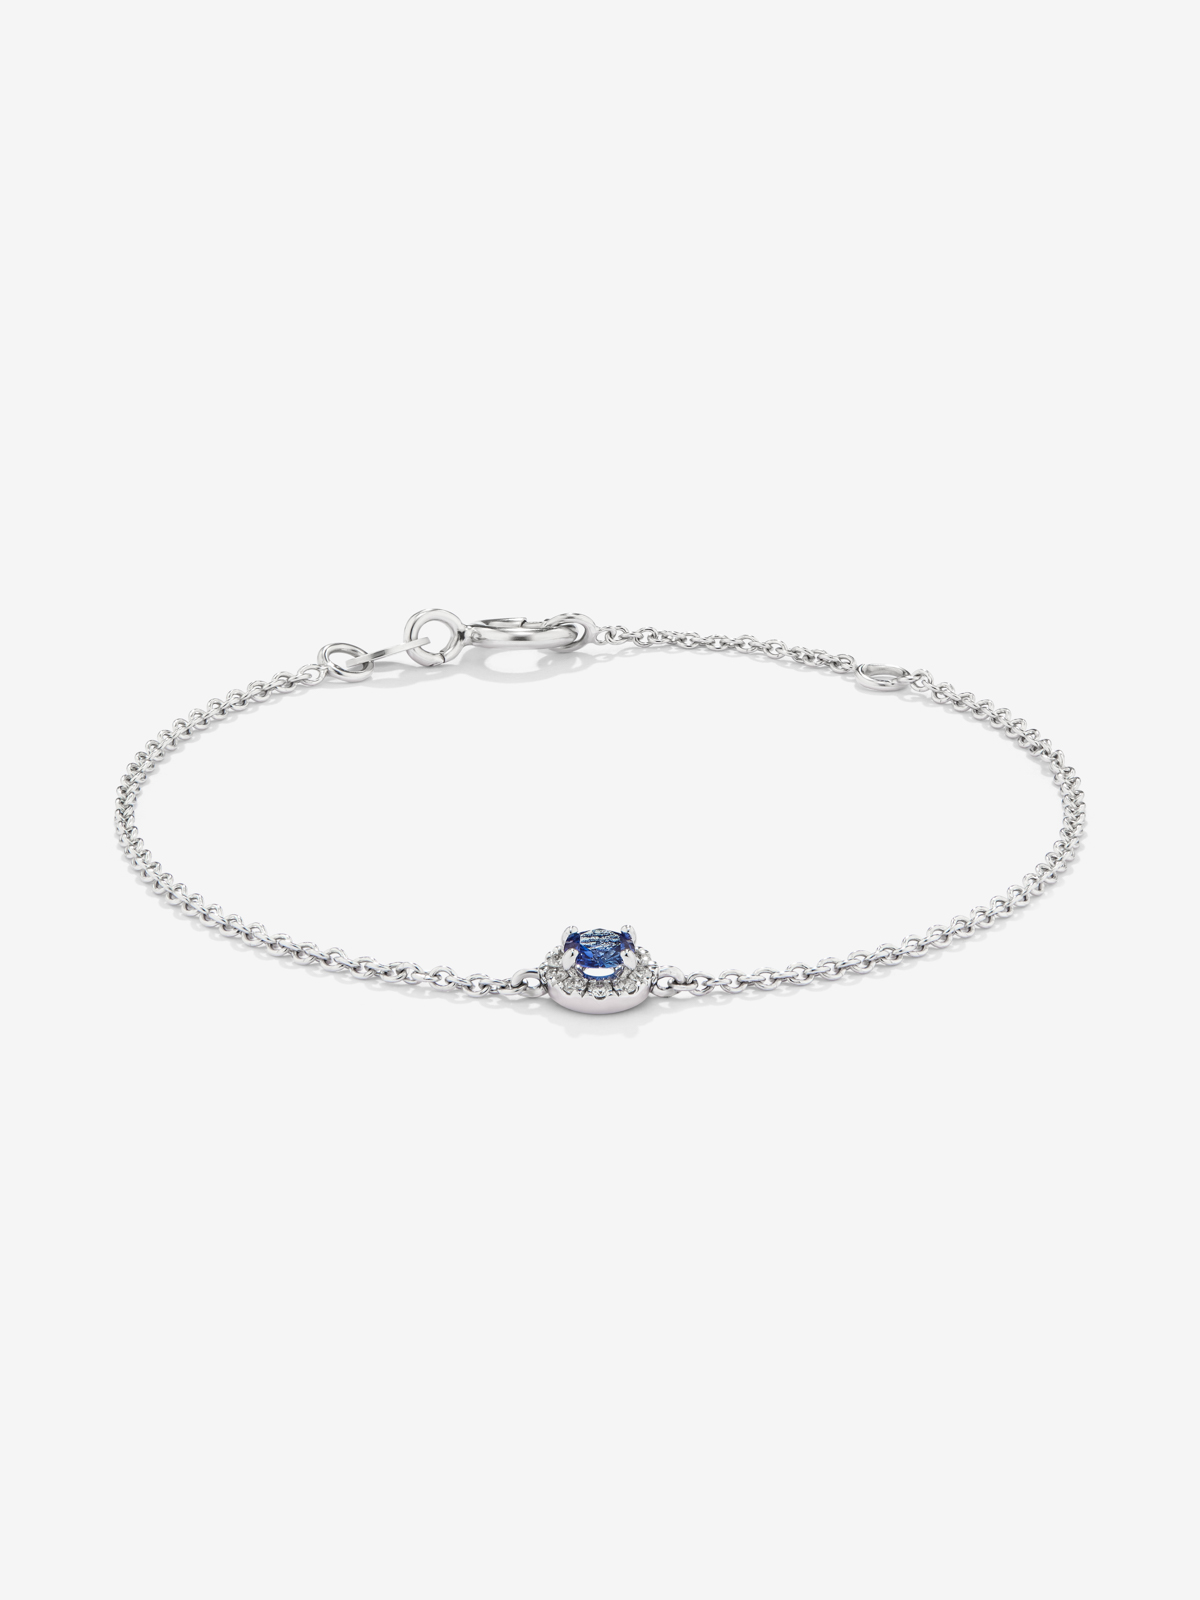 18K white gold bracelet with white diamonds in 0.06 cts and blue sapphire in a bright size of 0.25 cts